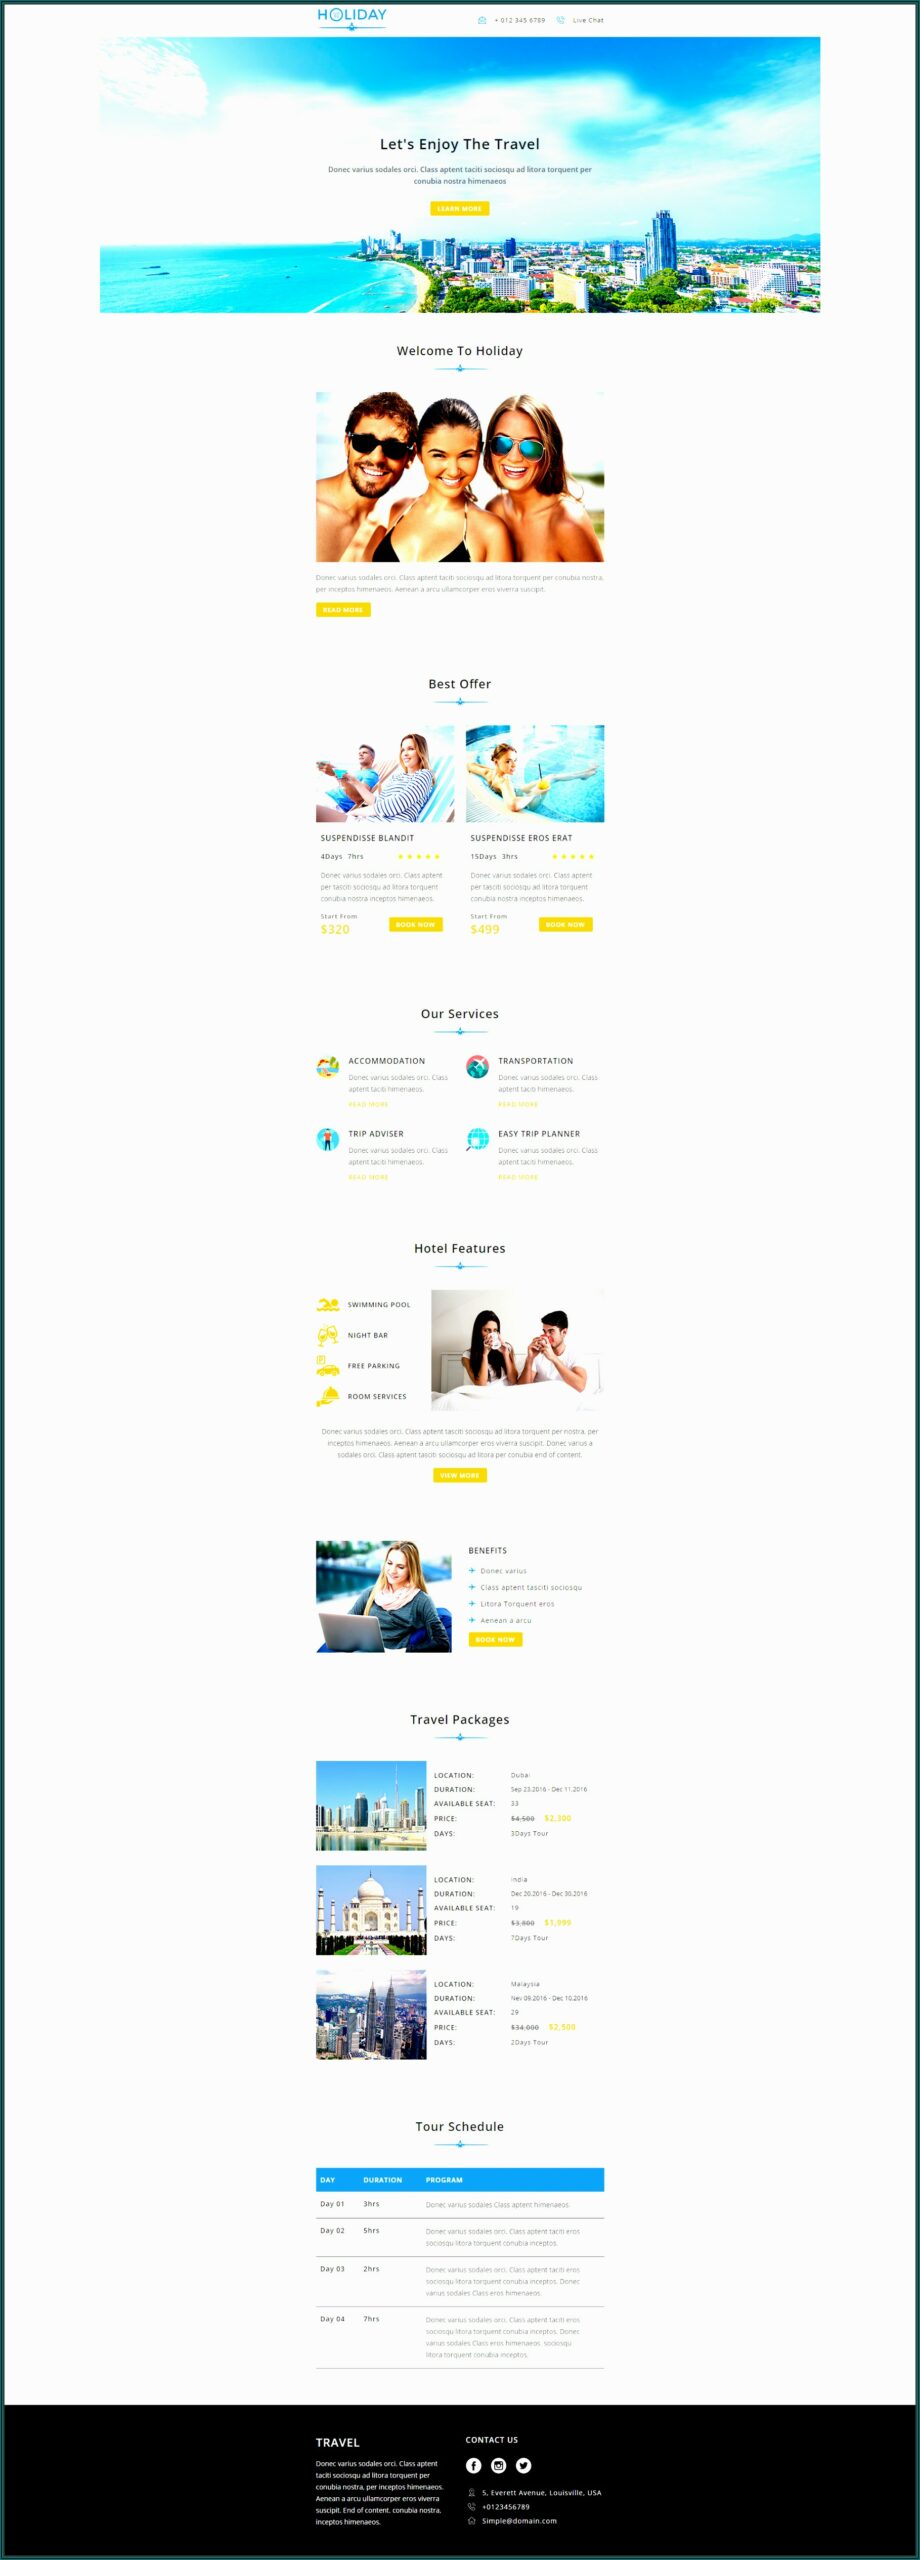 Microsoft Outlook Newsletter Templates Free